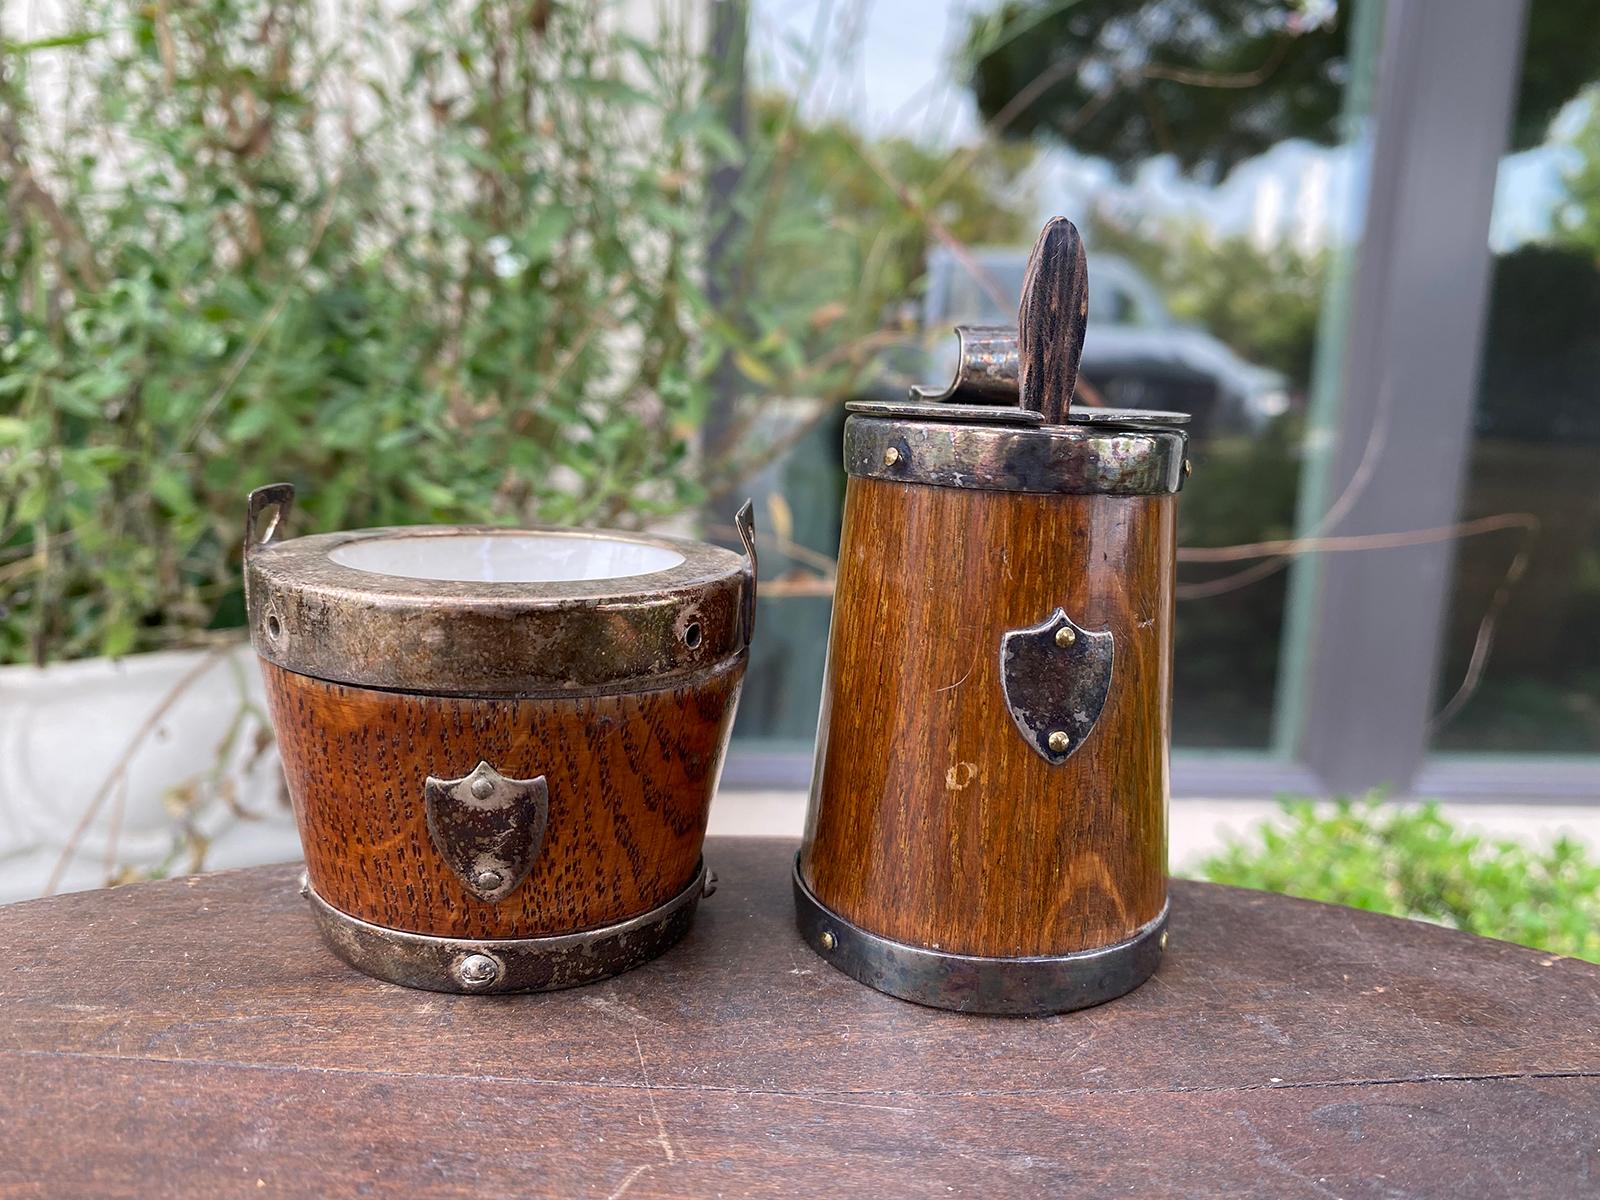 Two late 19th-early 20th century miniature wood & silver electroplate mustard pot with spoon and container with bergdorf goodman tag, epns mark on container.
Container:2.5